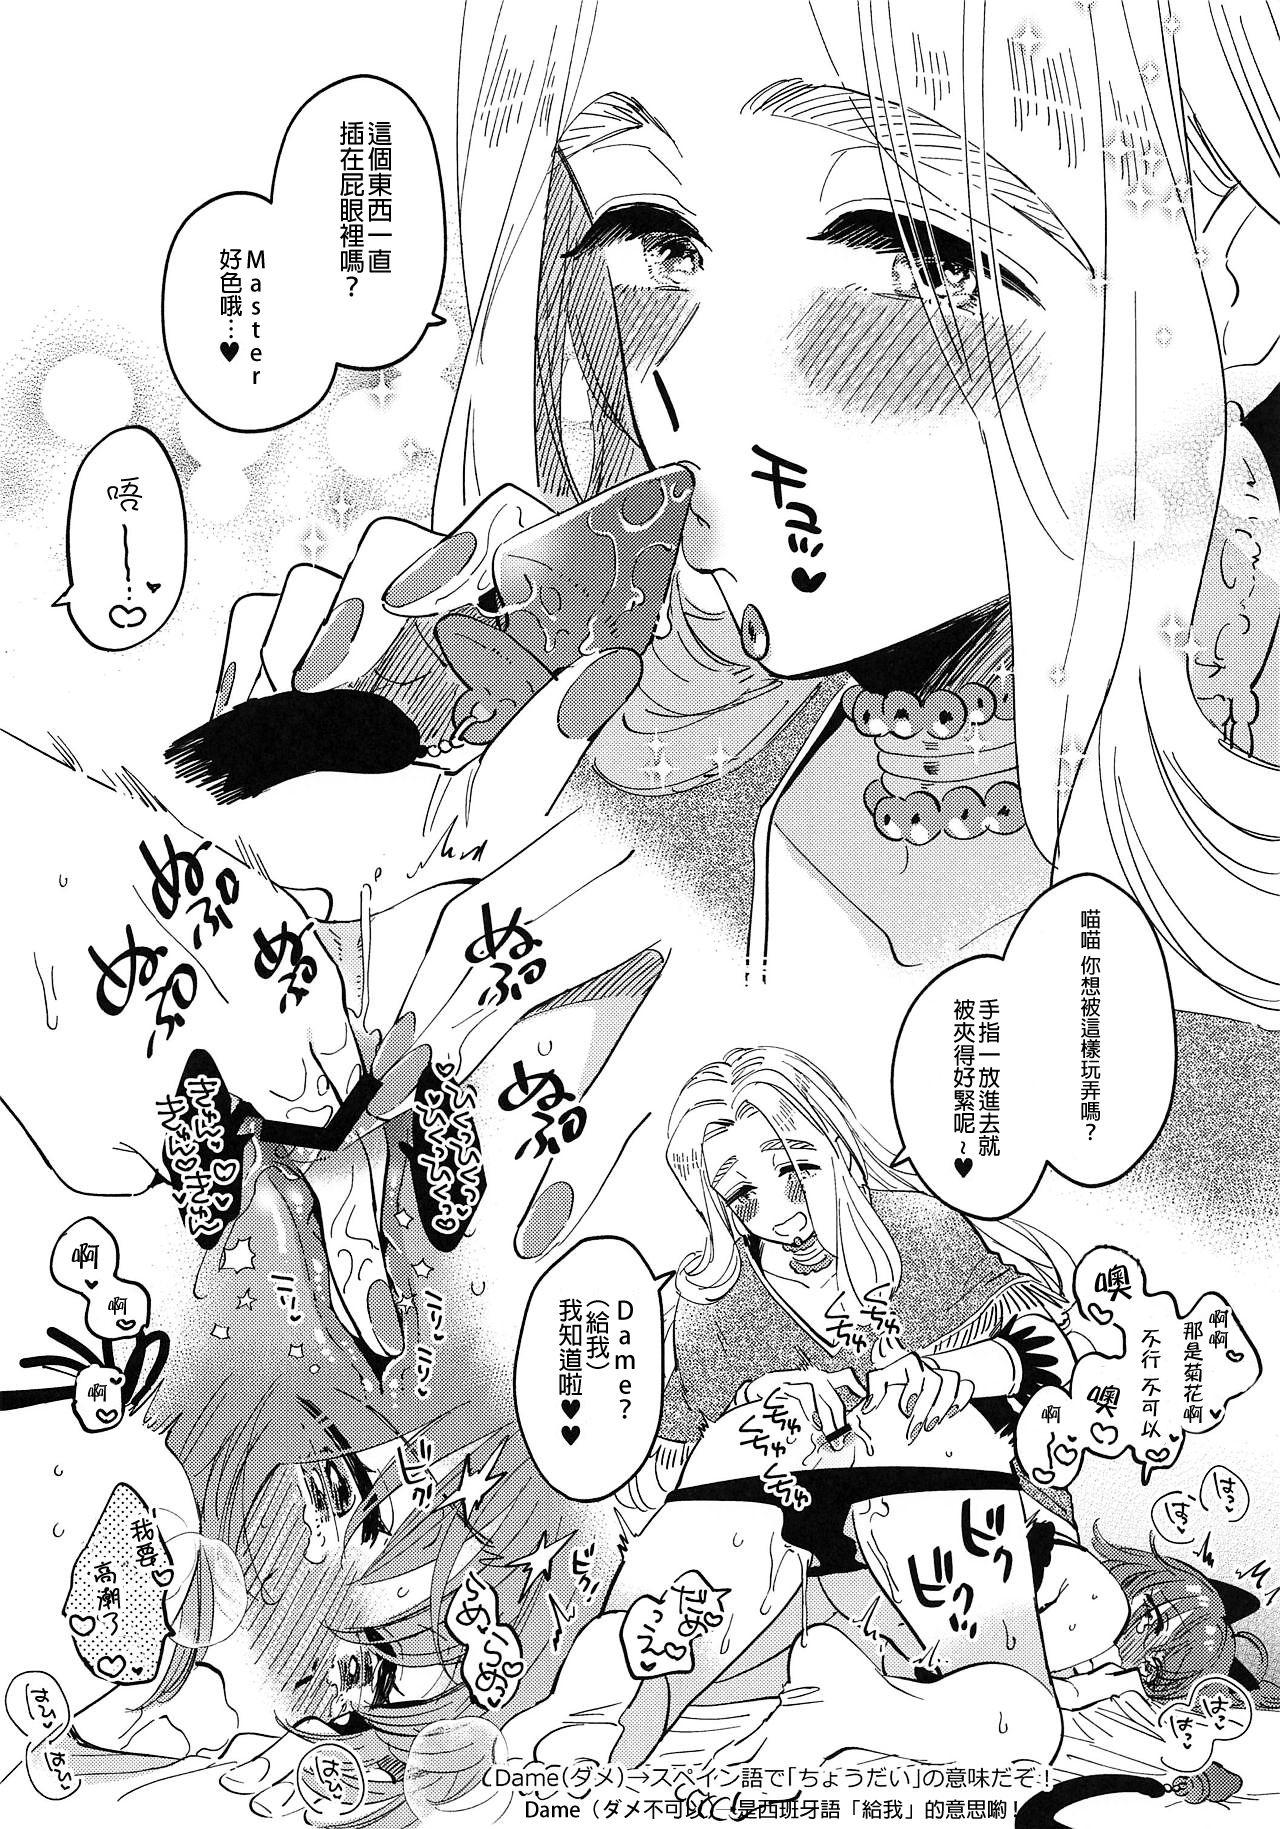 Blows 2019 GW QueGu Omakebon - Fate grand order Asian Babes - Page 7